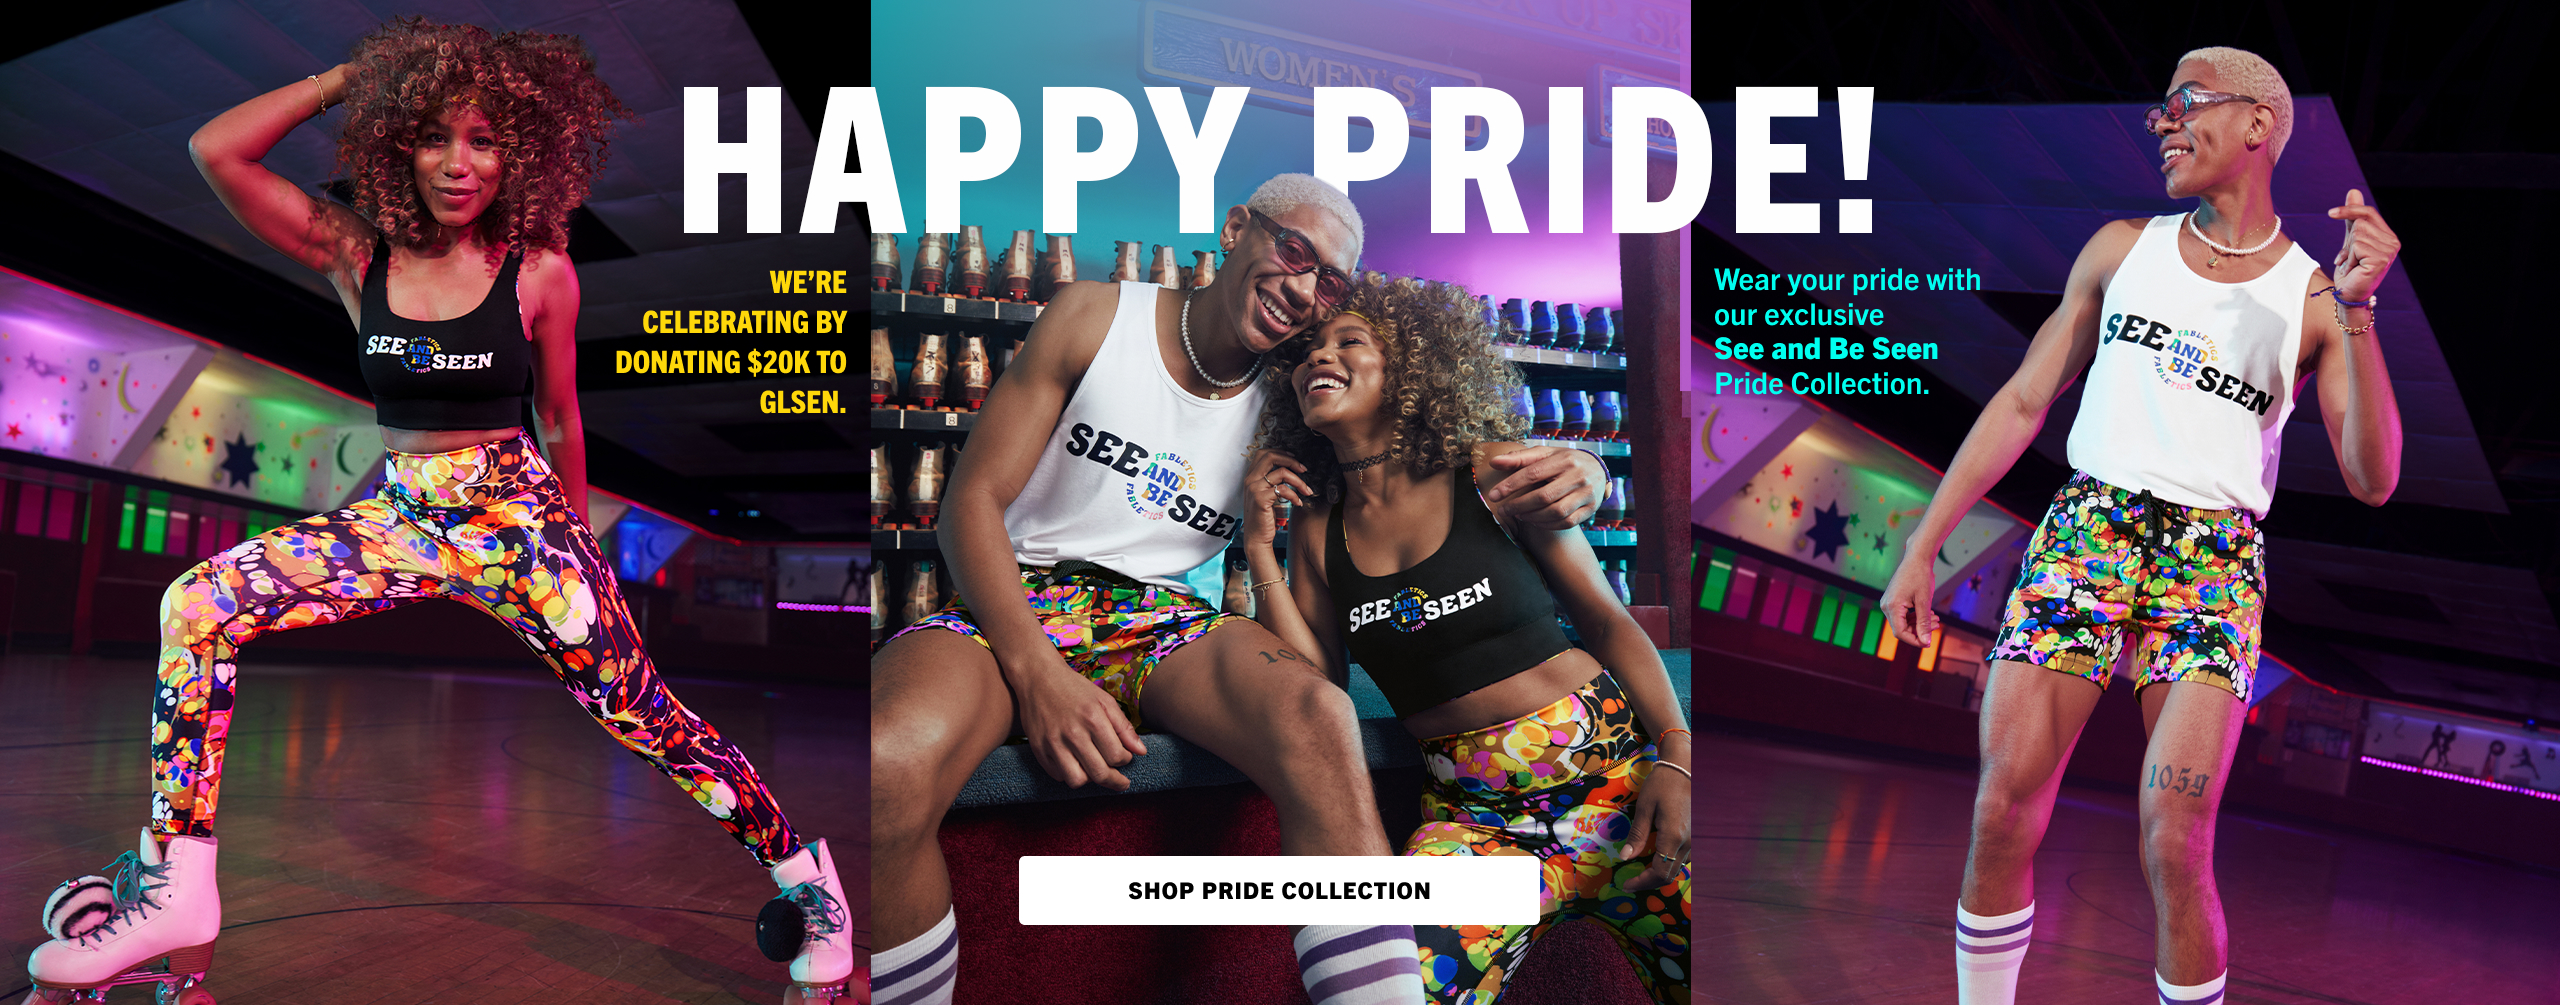 Happy Pride! We're celebrating by donating $20K to GLSEN. Wear your Pride with our exclusive See and Be Seen Pride Collection. Take the quiz to shop the Pride collection.